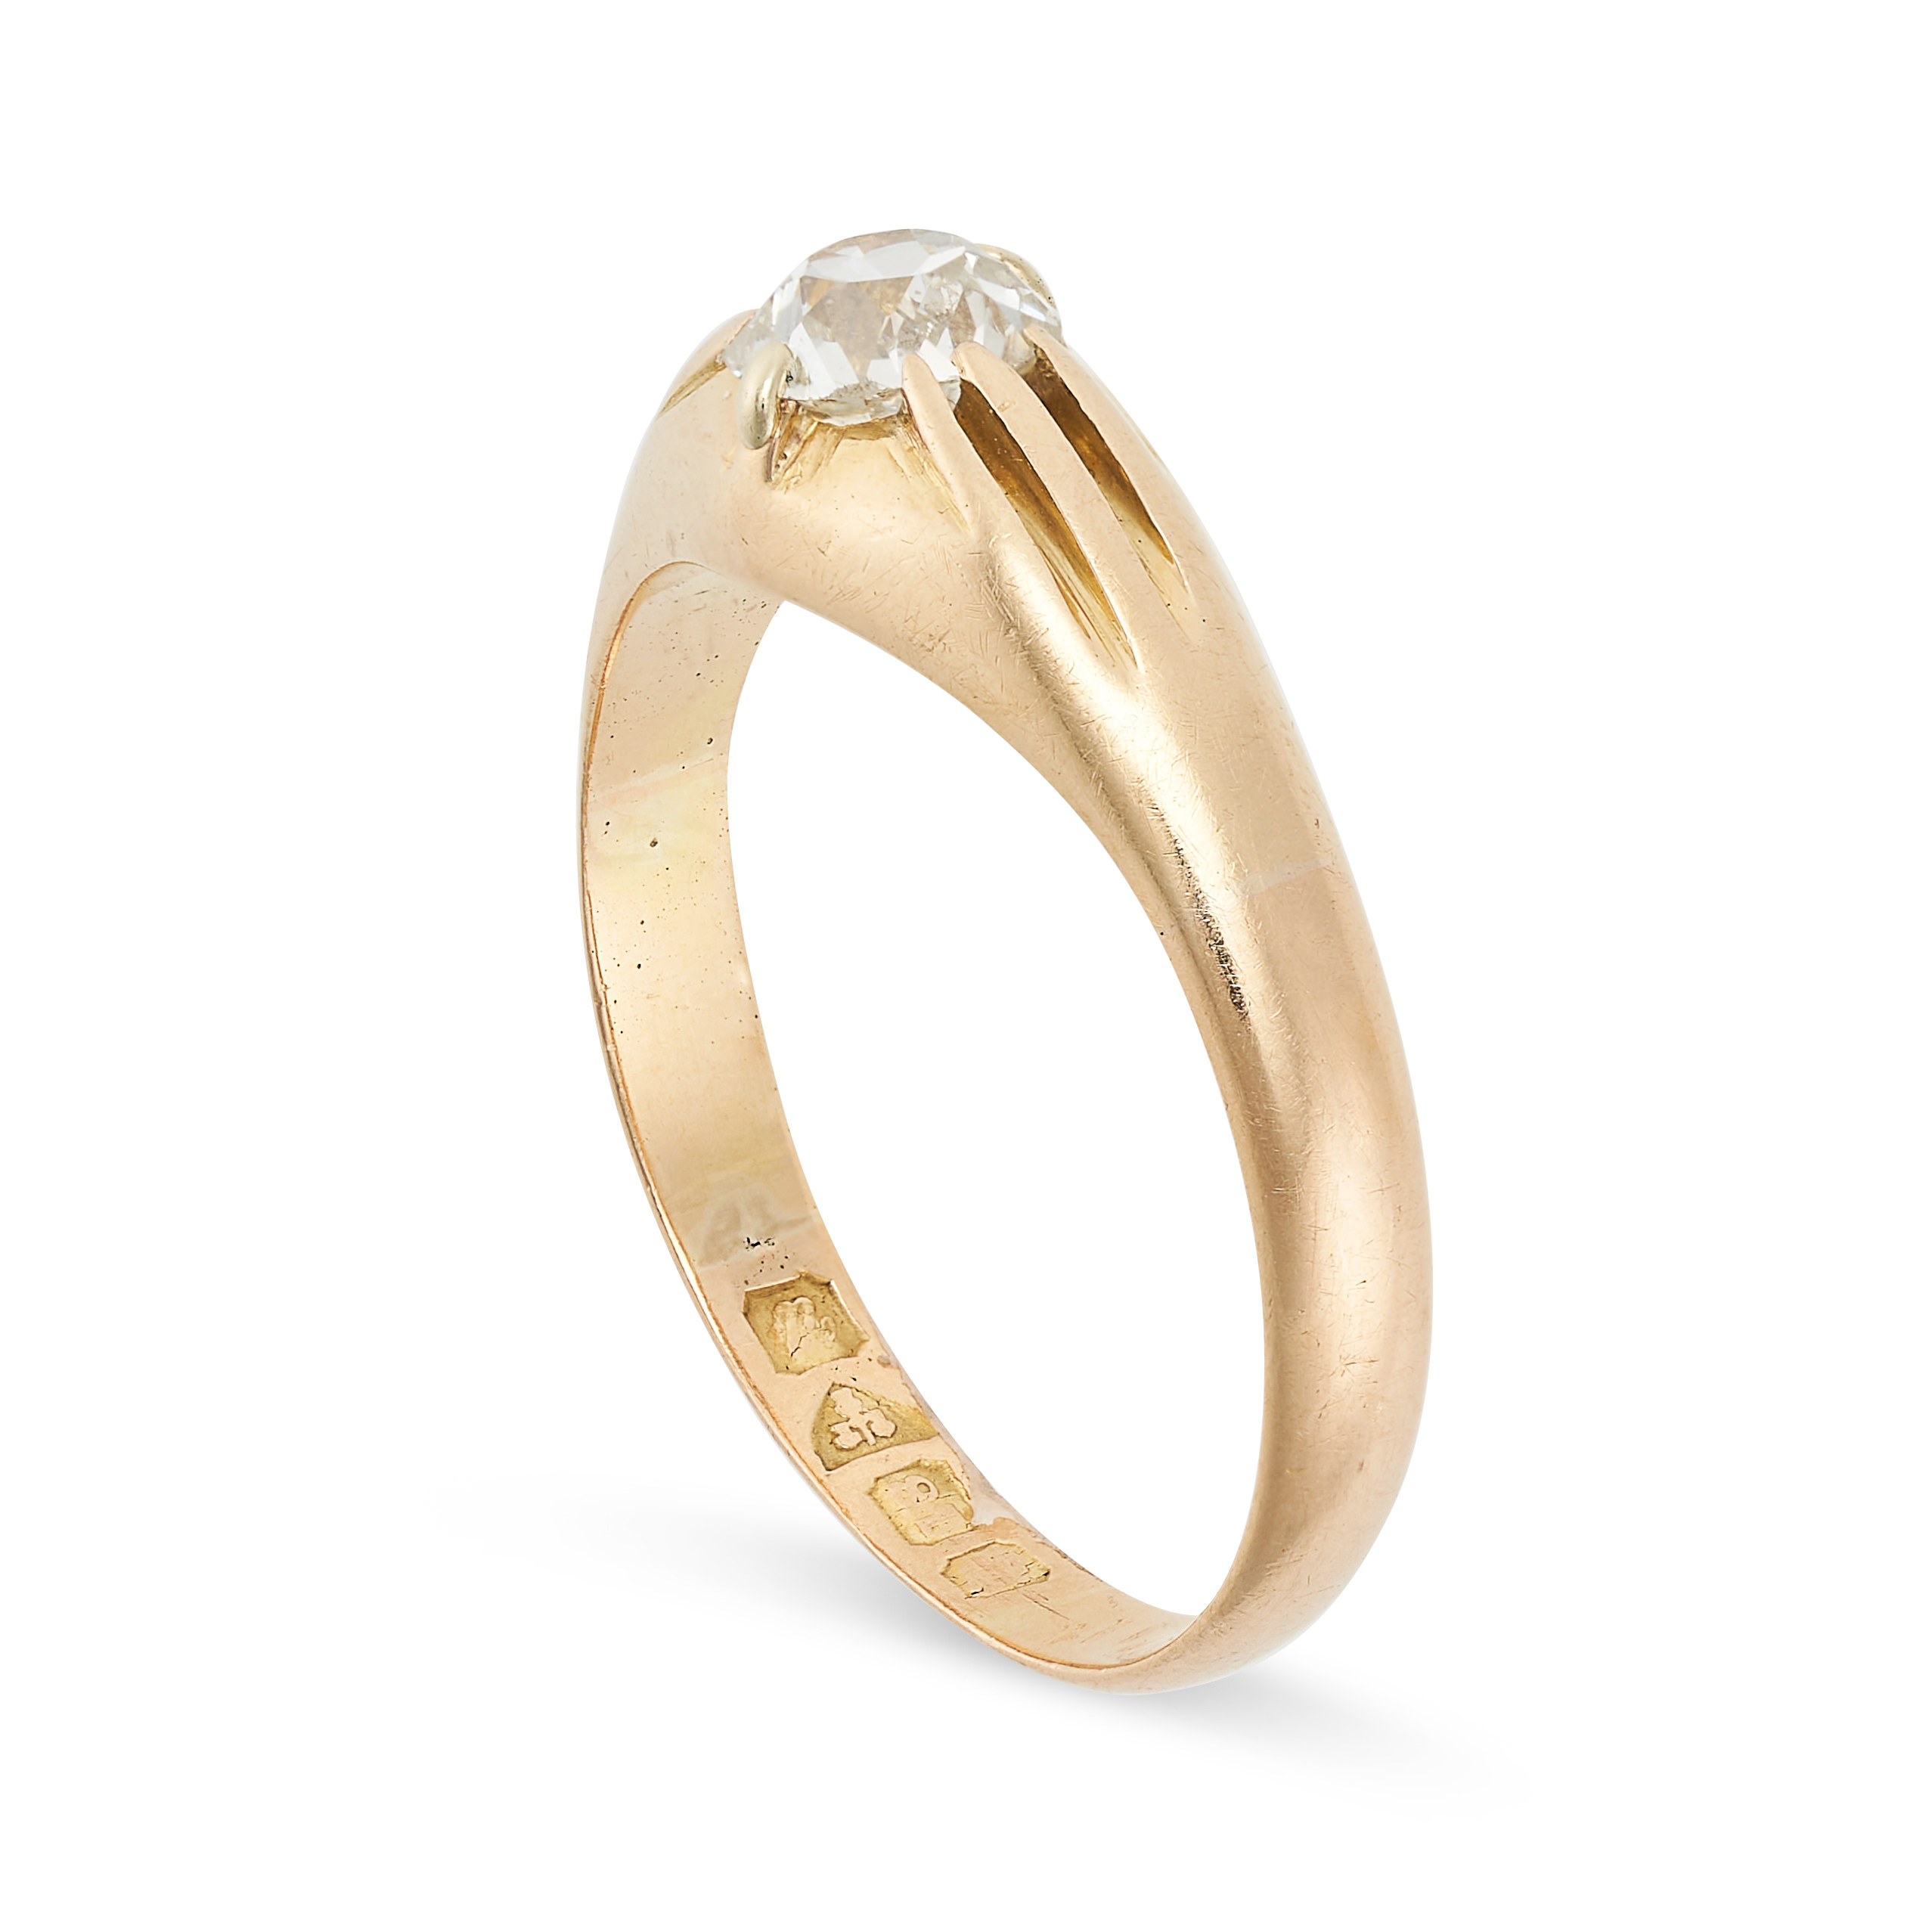 AN ANTIQUE DIAMOND GYPSY RING in 18ct yellow gold, set with an old cut diamond of 0.58 carats, - Image 2 of 2